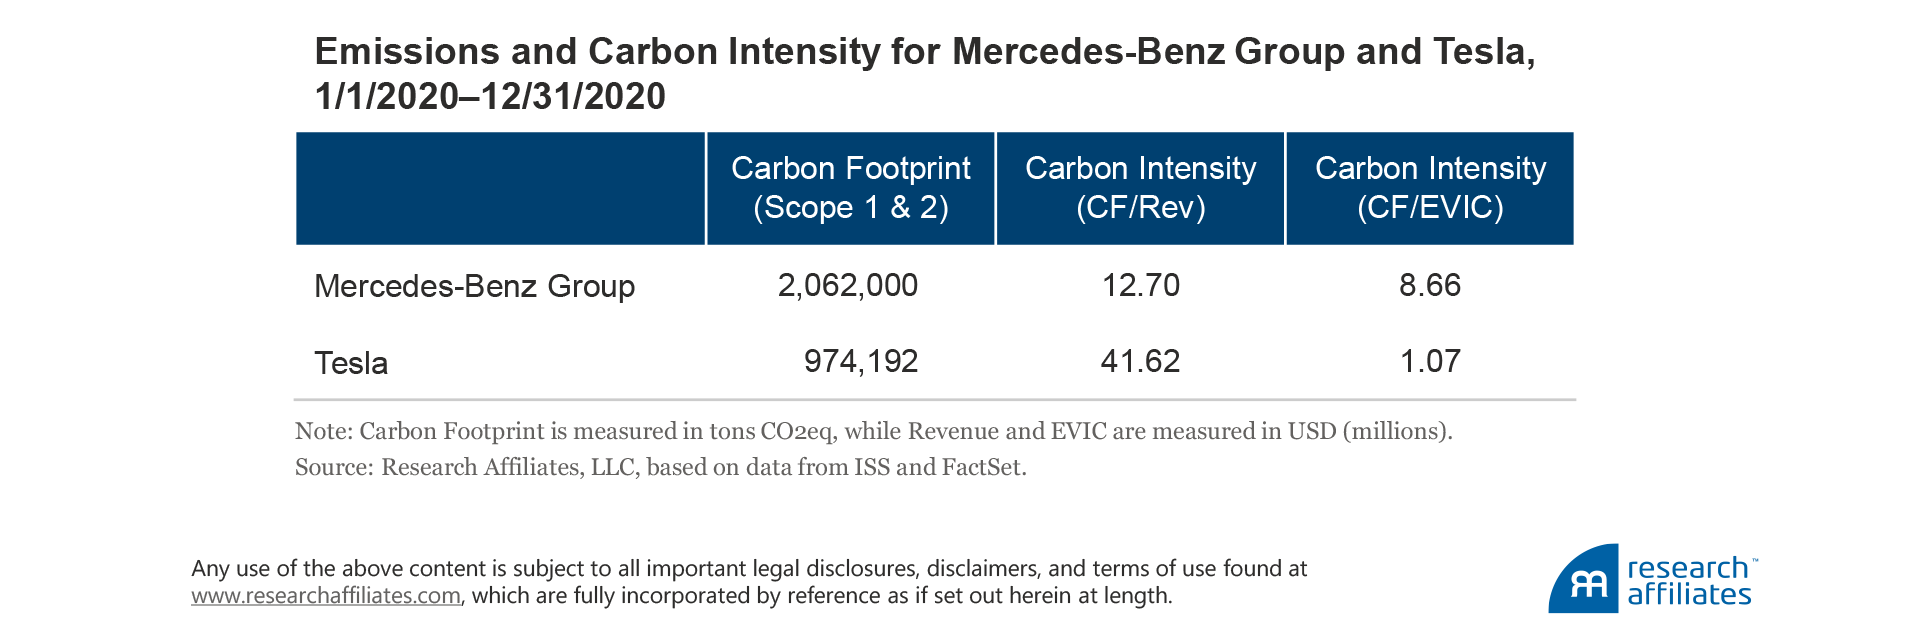 924-carbon-intensity-table-1